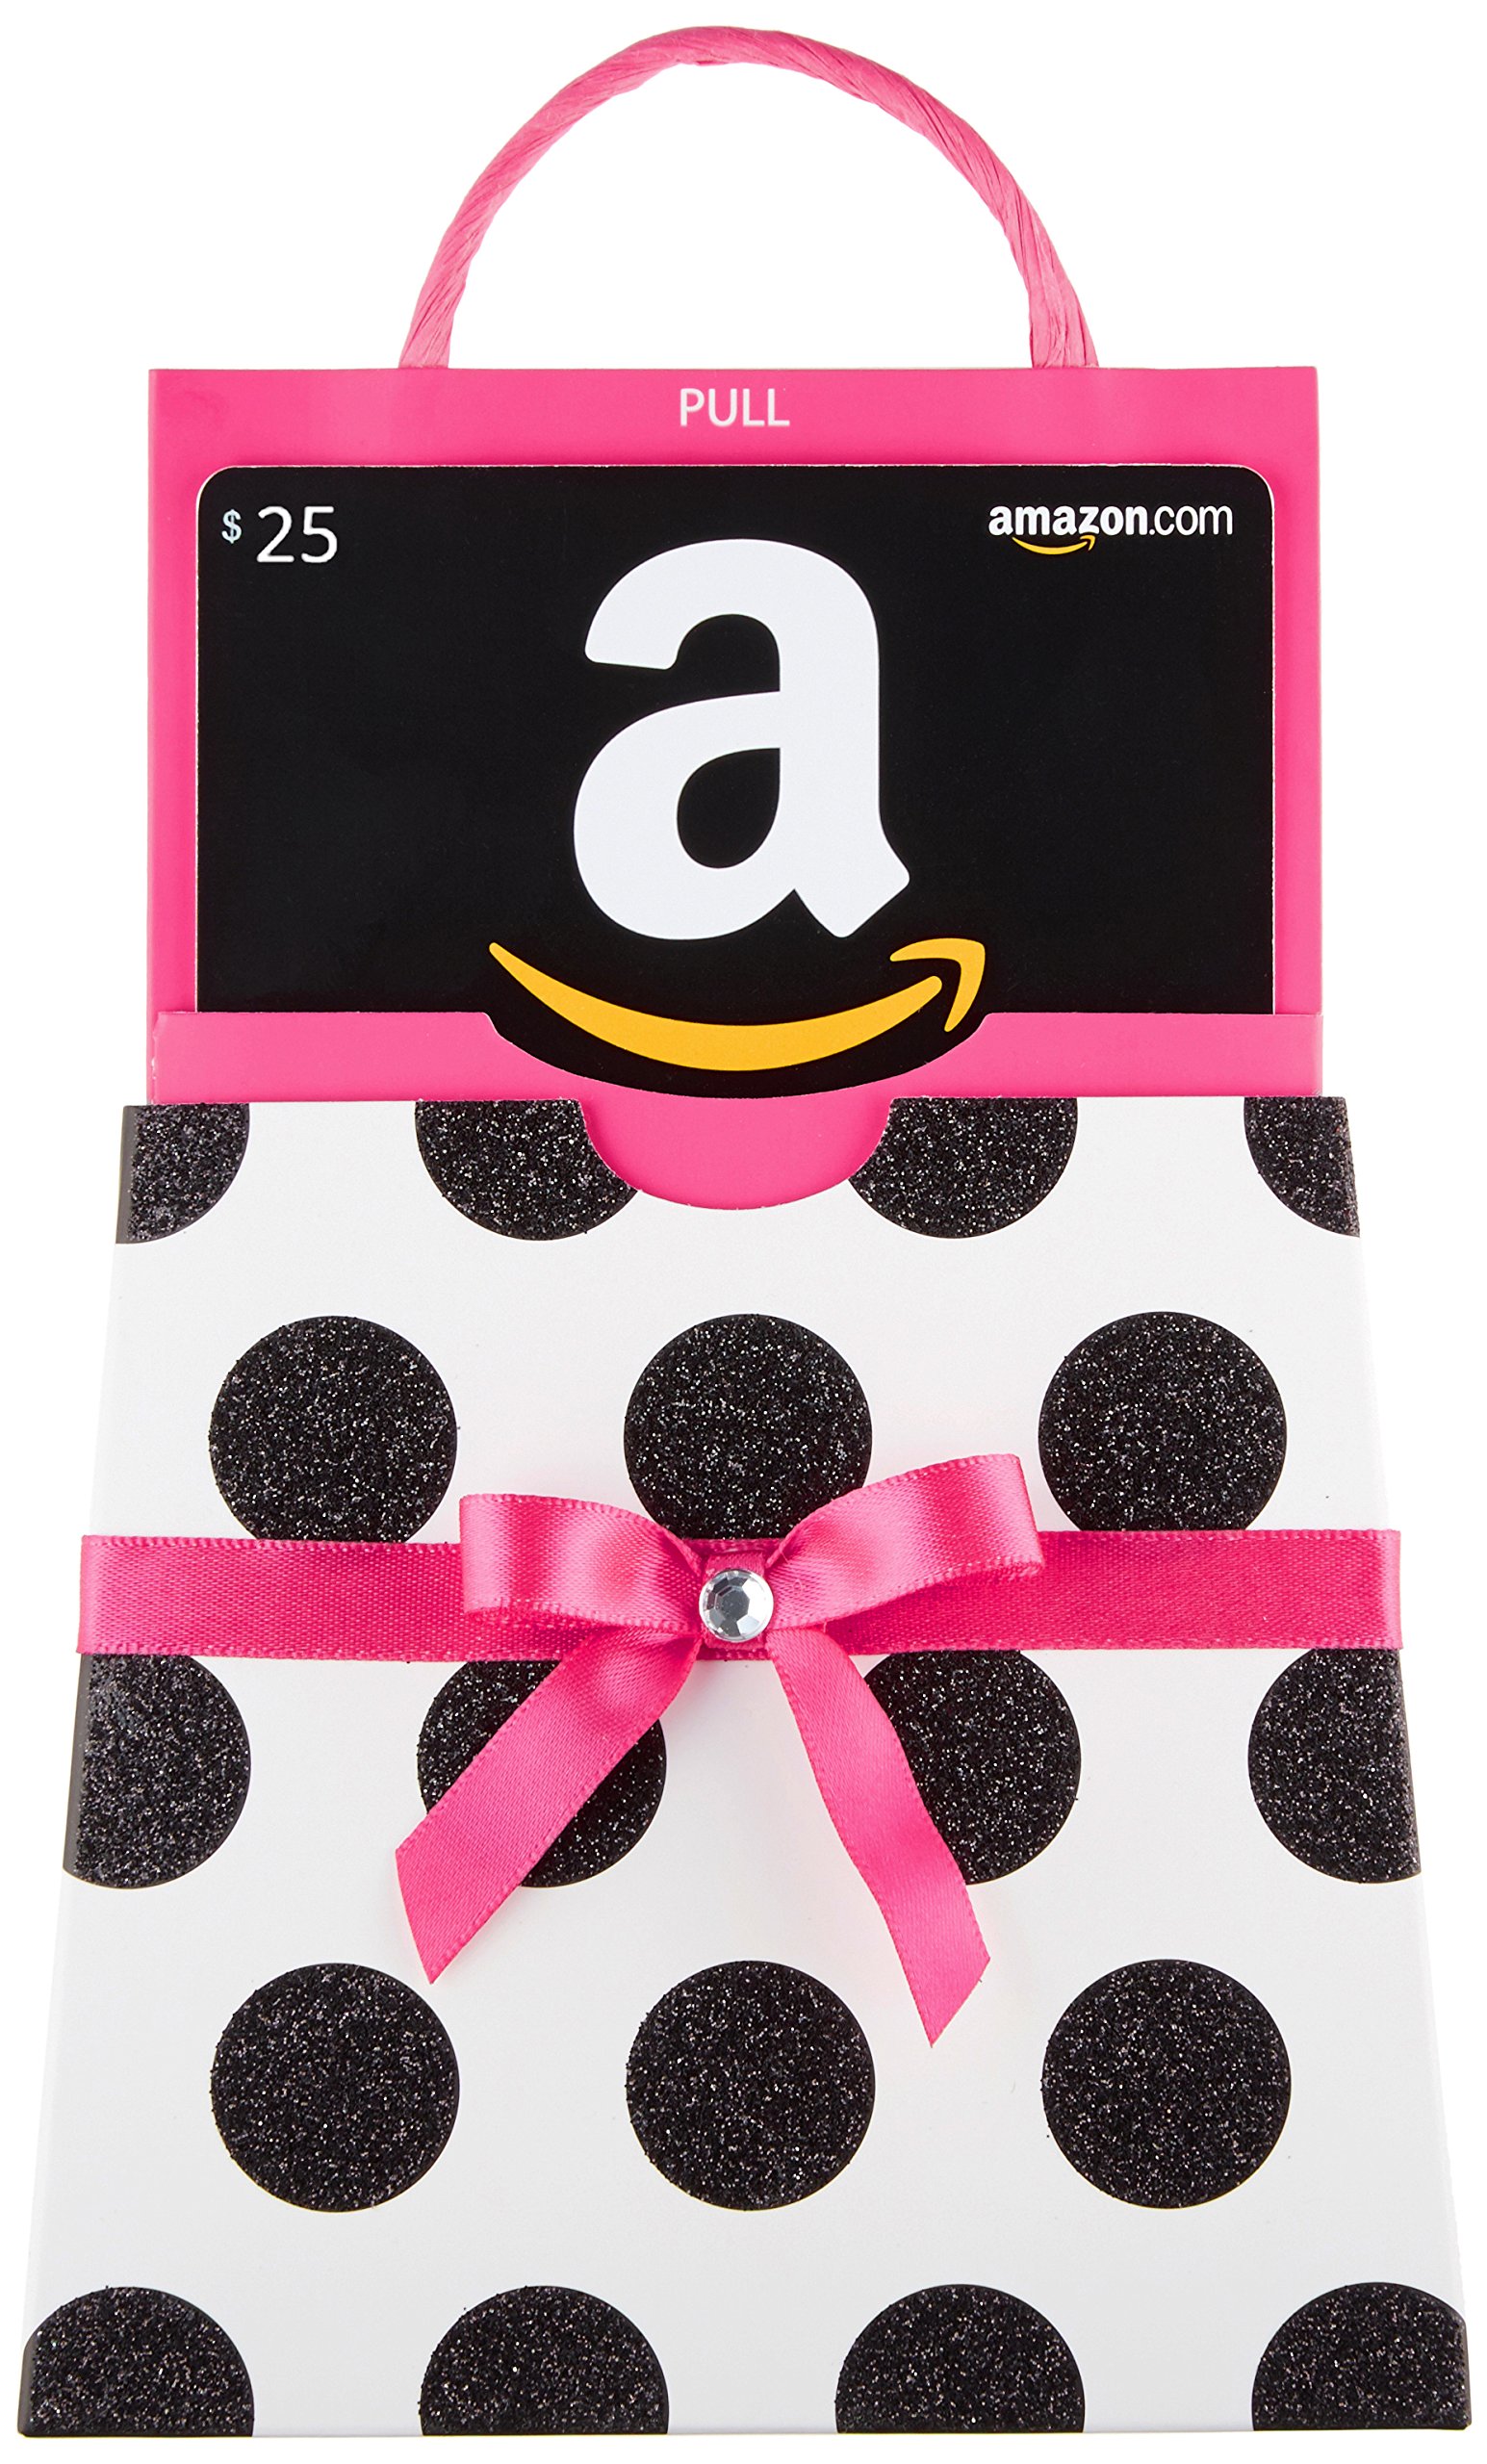 Book Cover Amazon.com Gift Card in a Polka Dot Reveal (Classic Black Card Design)